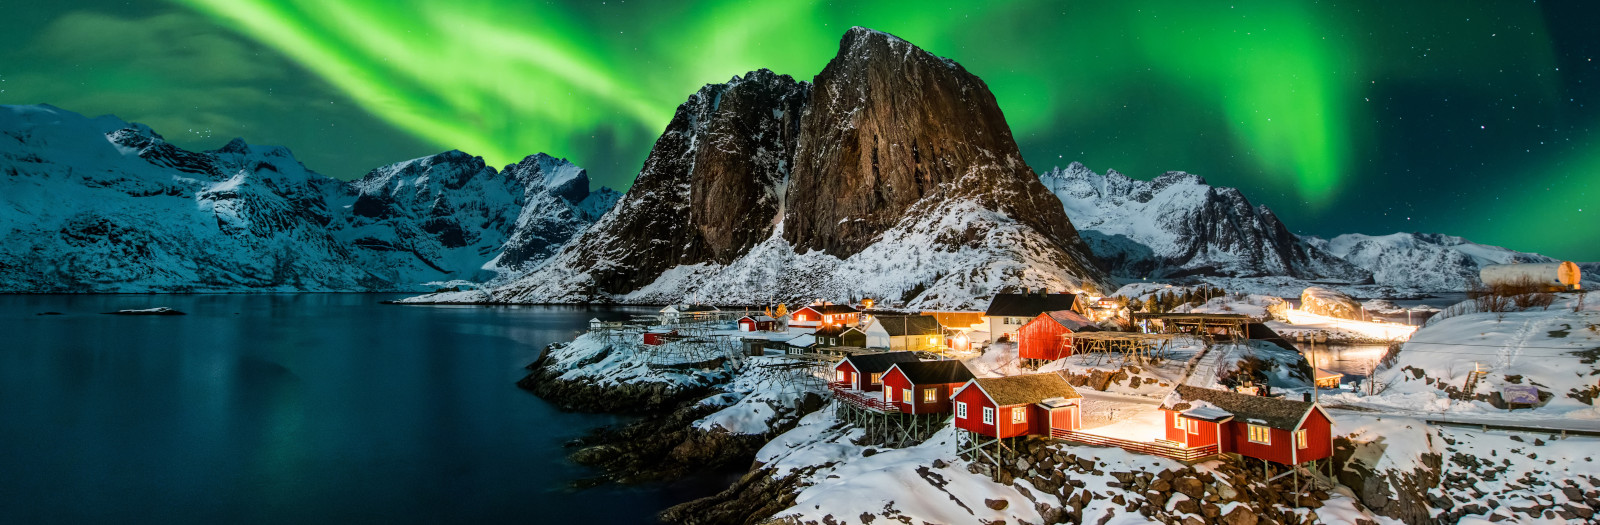 The Northern Lights over the Norwegian town of Hamnoy